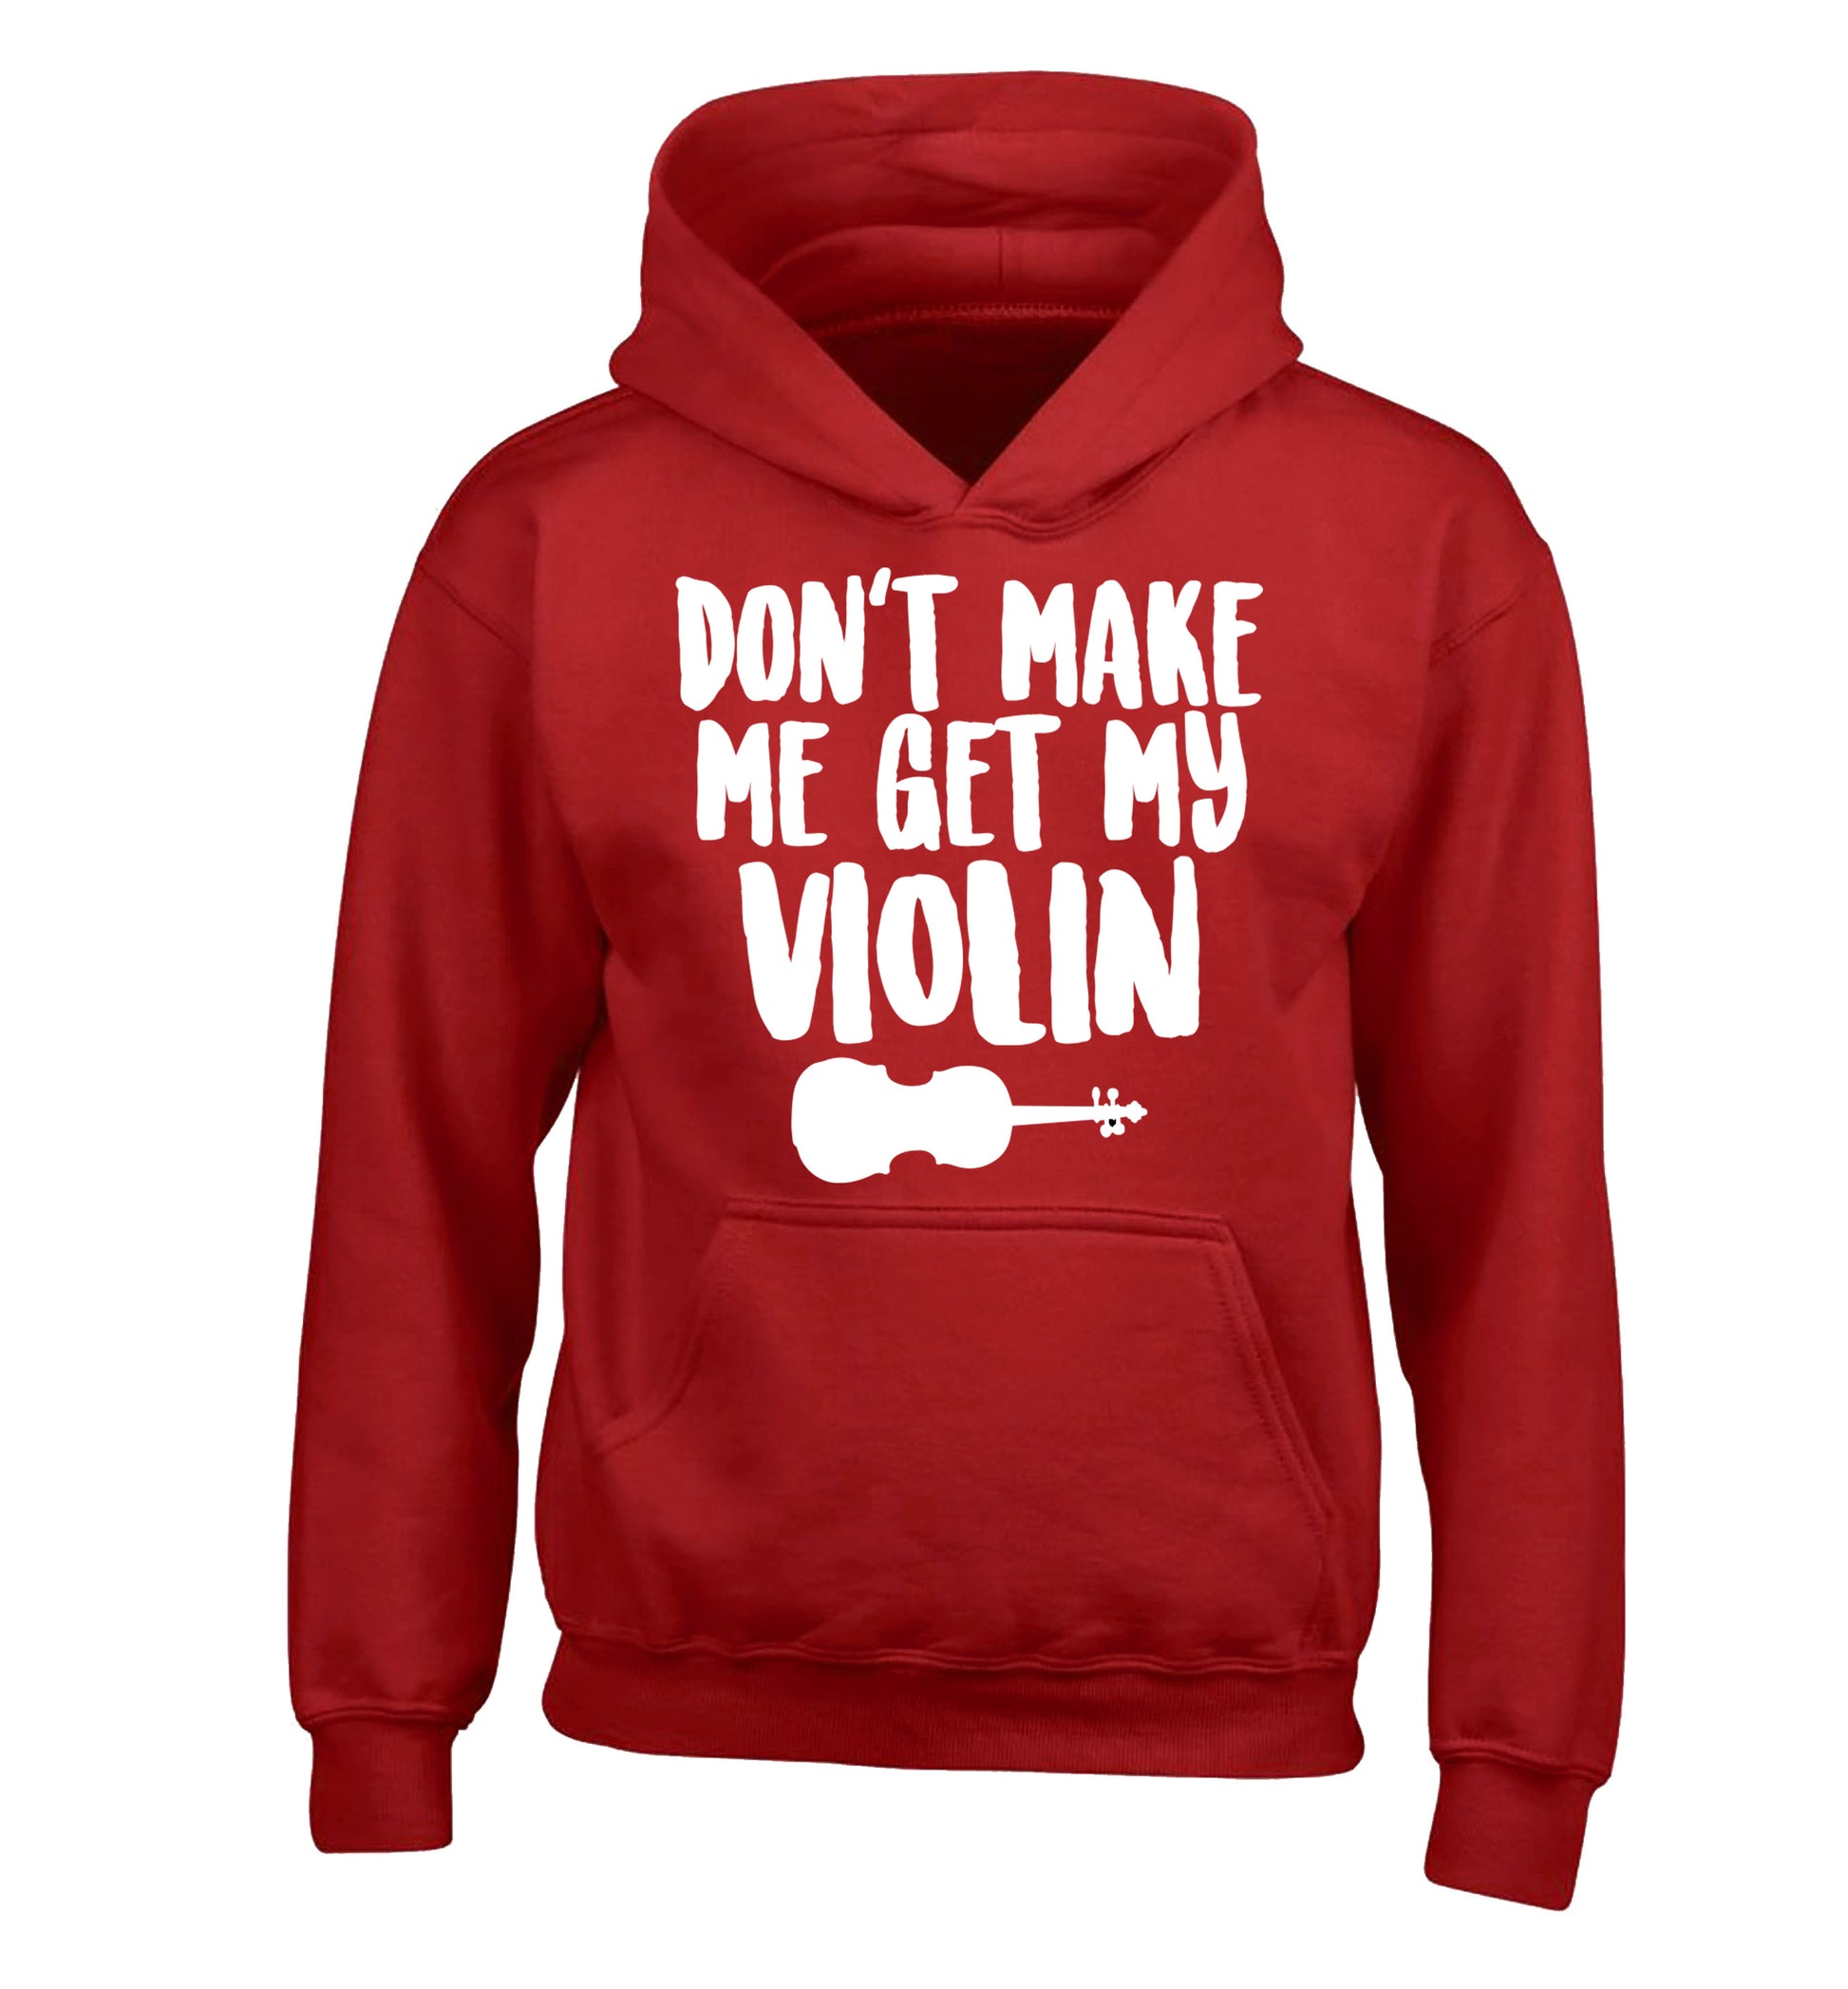 Don't make me get my violin children's red hoodie 12-13 Years